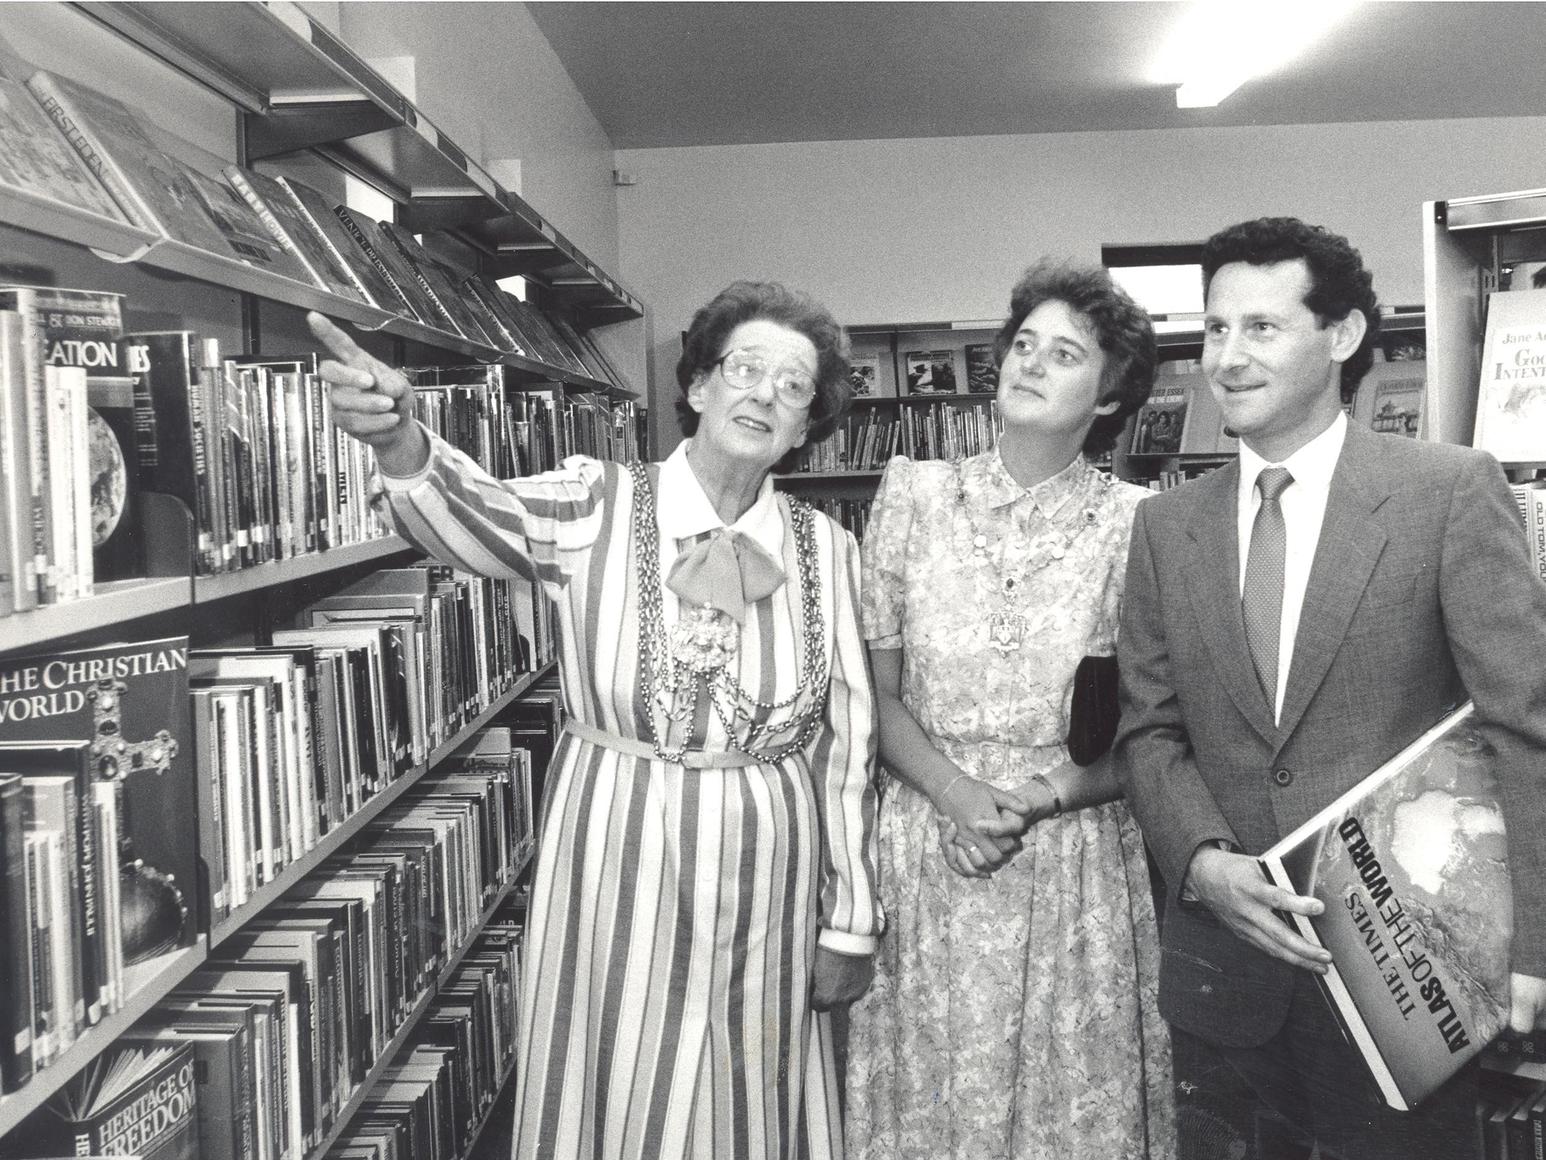 Halton's new library is opened by the then Lord Mayor of Leeds, Coun Doreen Wood (left), who is pictured with the Lady Mayoress Sheila Staveley and David Edelman, director of Moorland Estates.